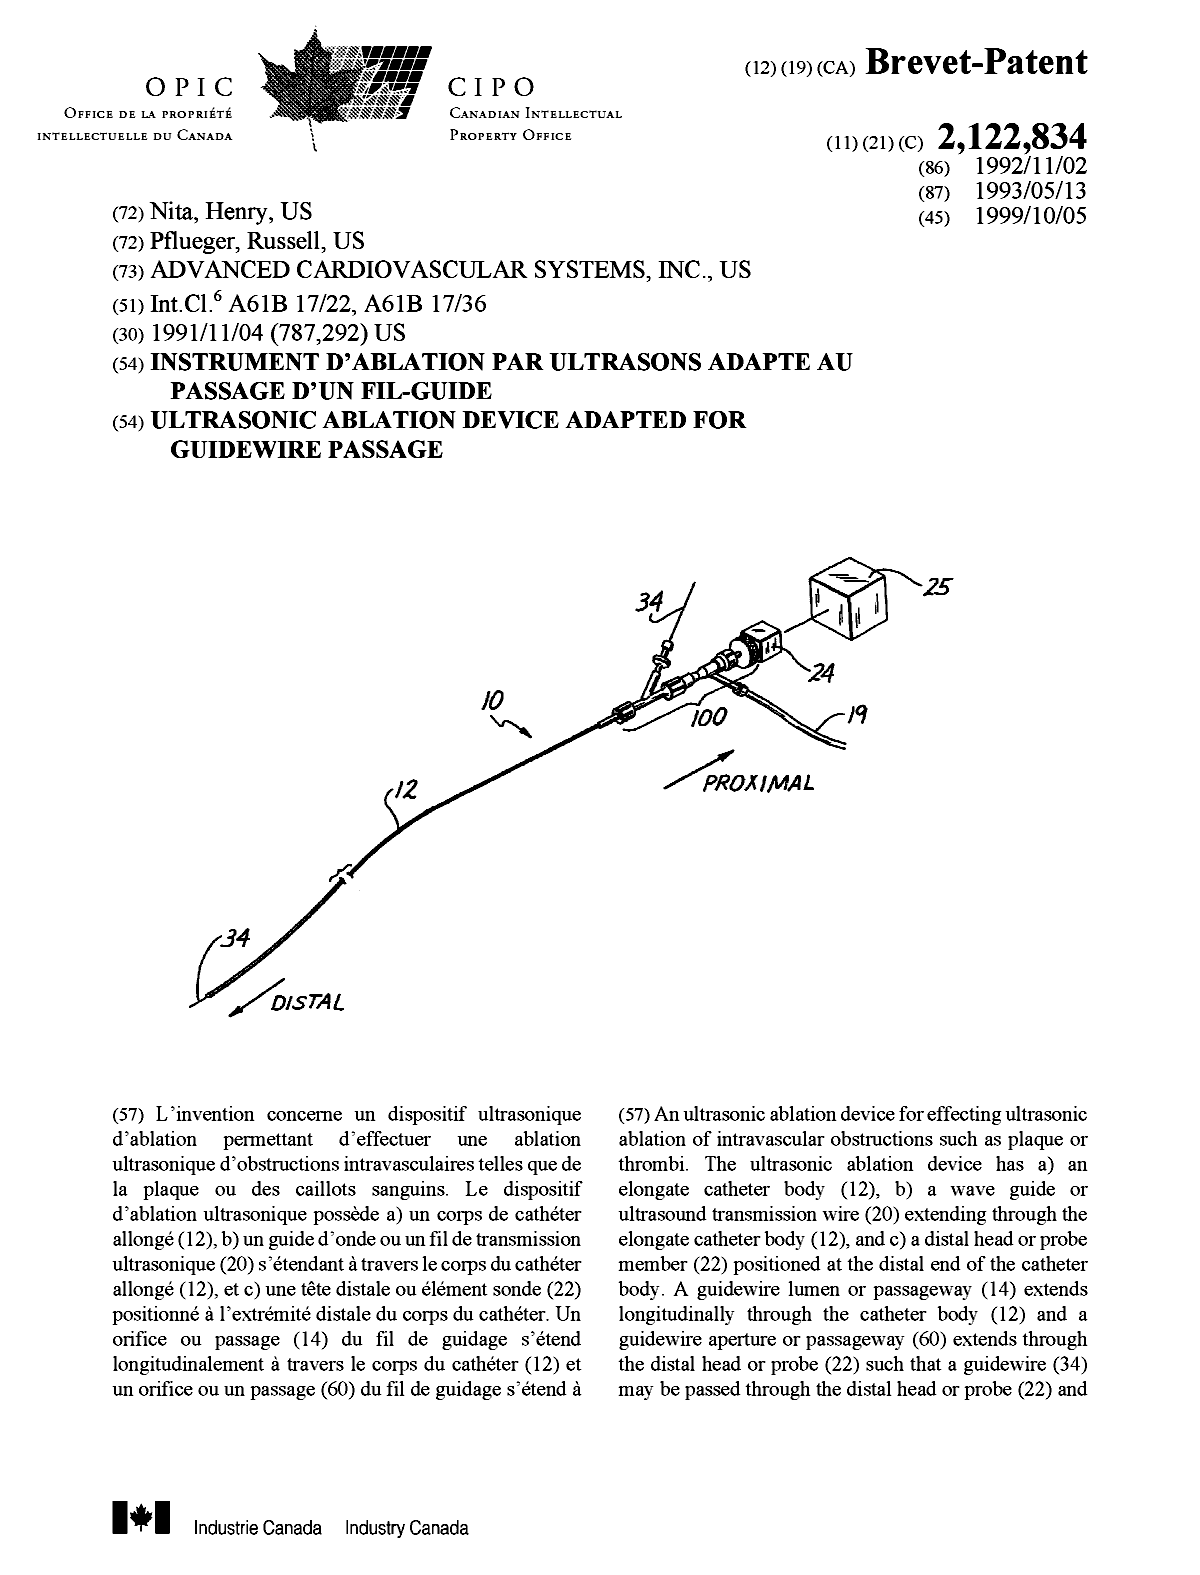 Canadian Patent Document 2122834. Cover Page 19990927. Image 1 of 2